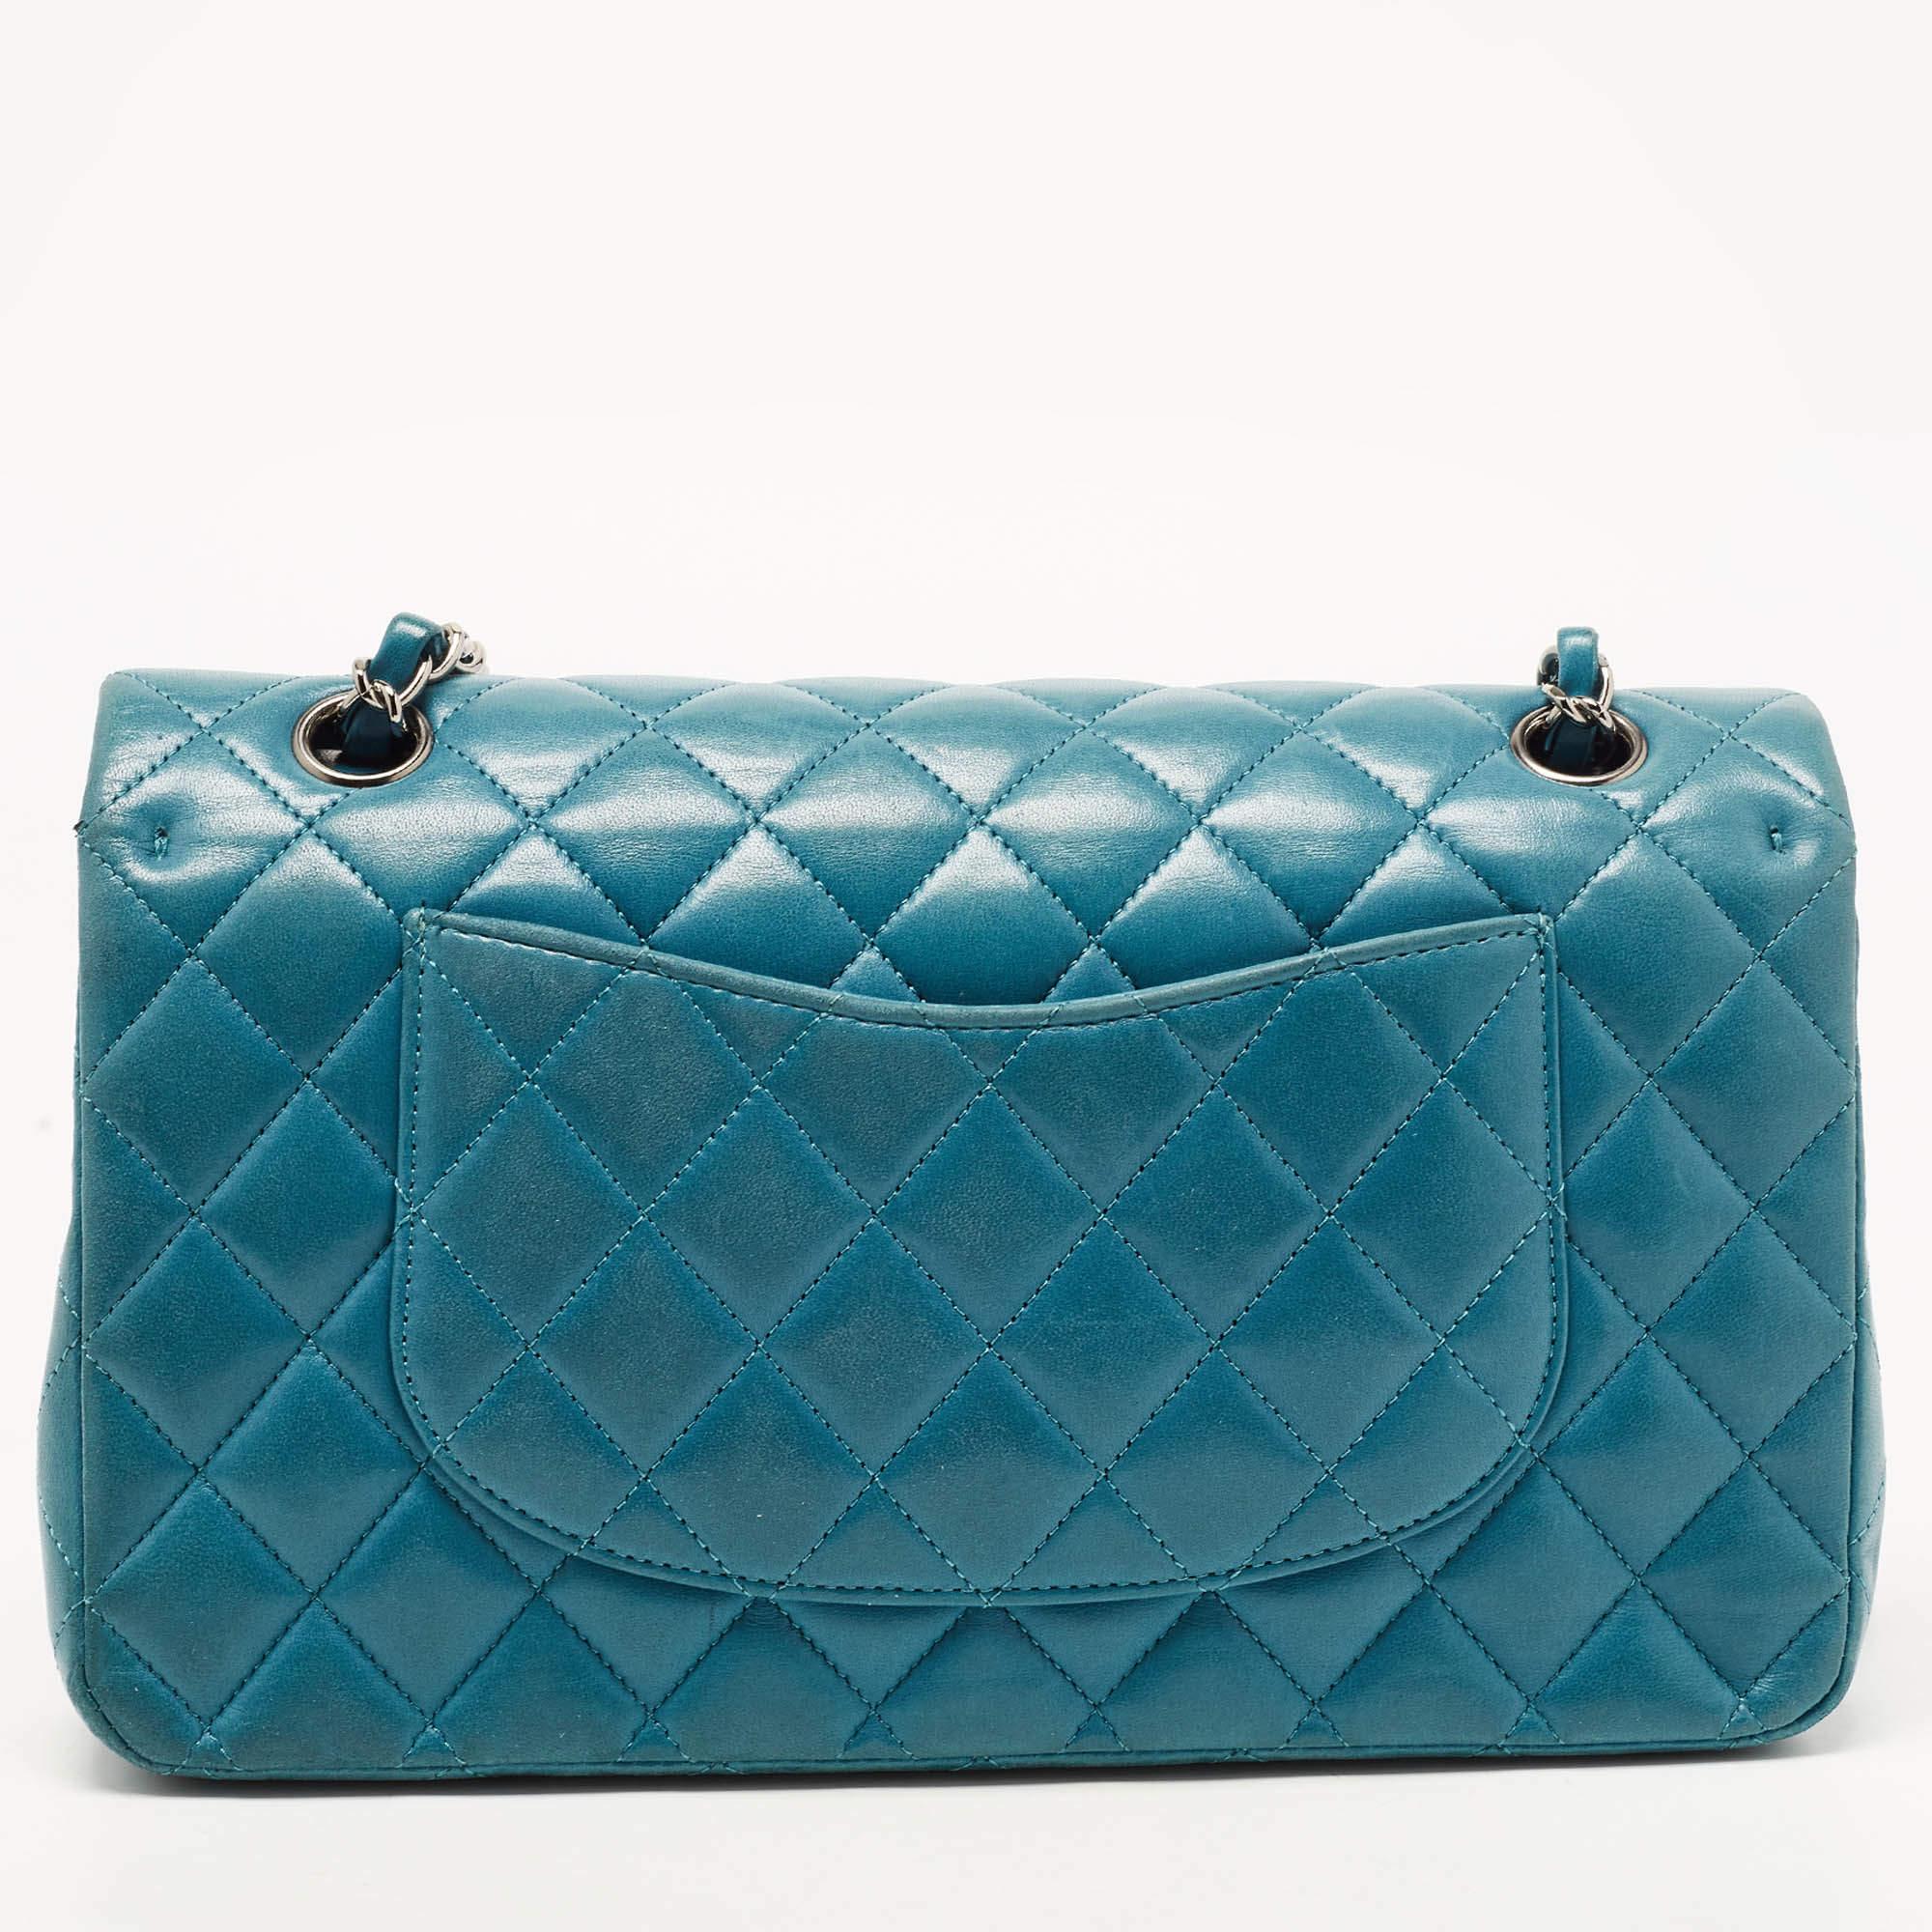 Chanel Teal Quilted Leather Medium Classic Double Flap Bag 1